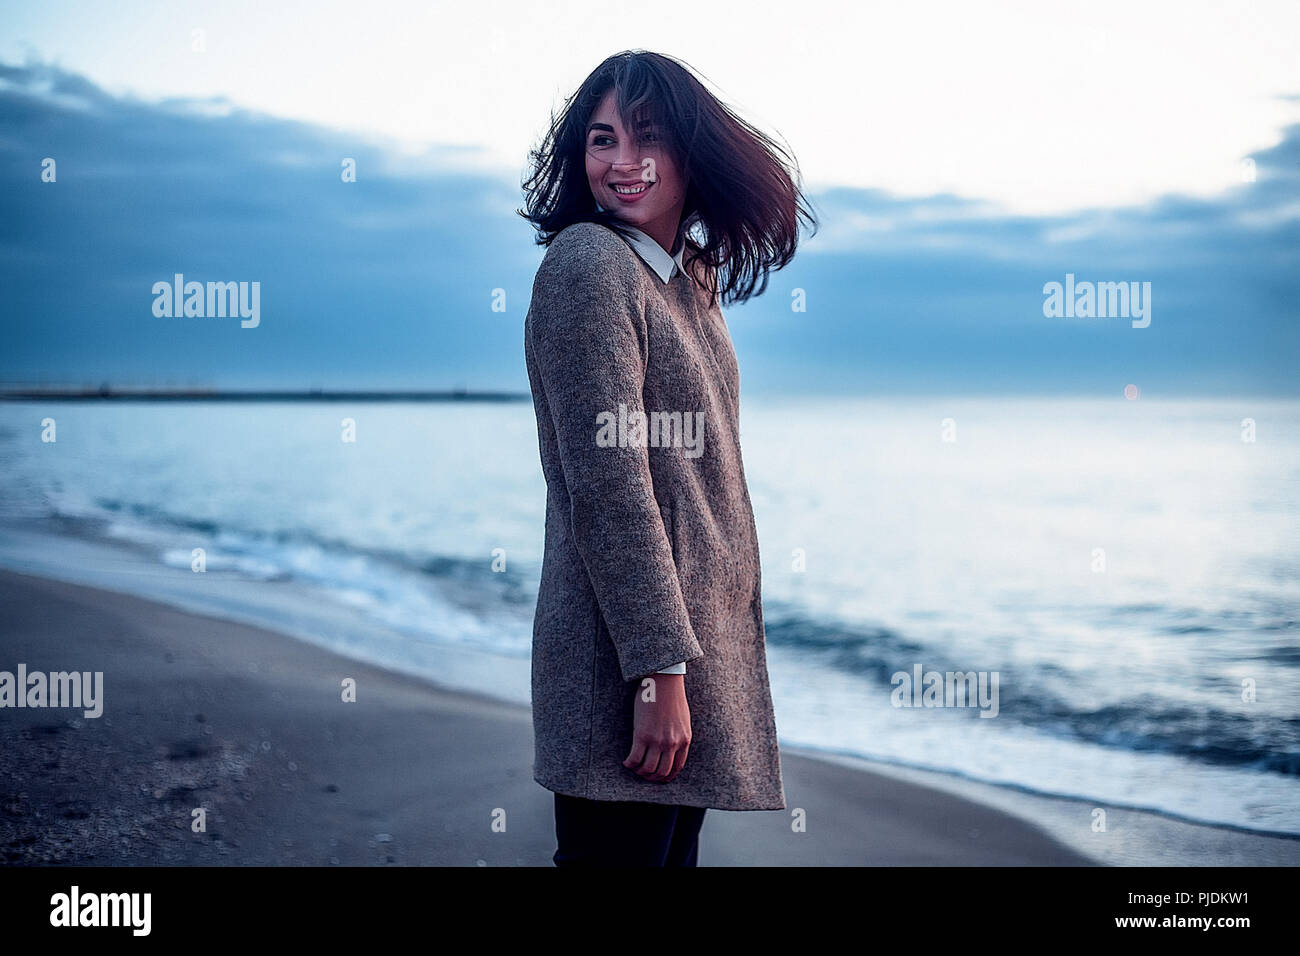 Portrait of young woman standing on beach, looking over Shoulder, smiling Banque D'Images